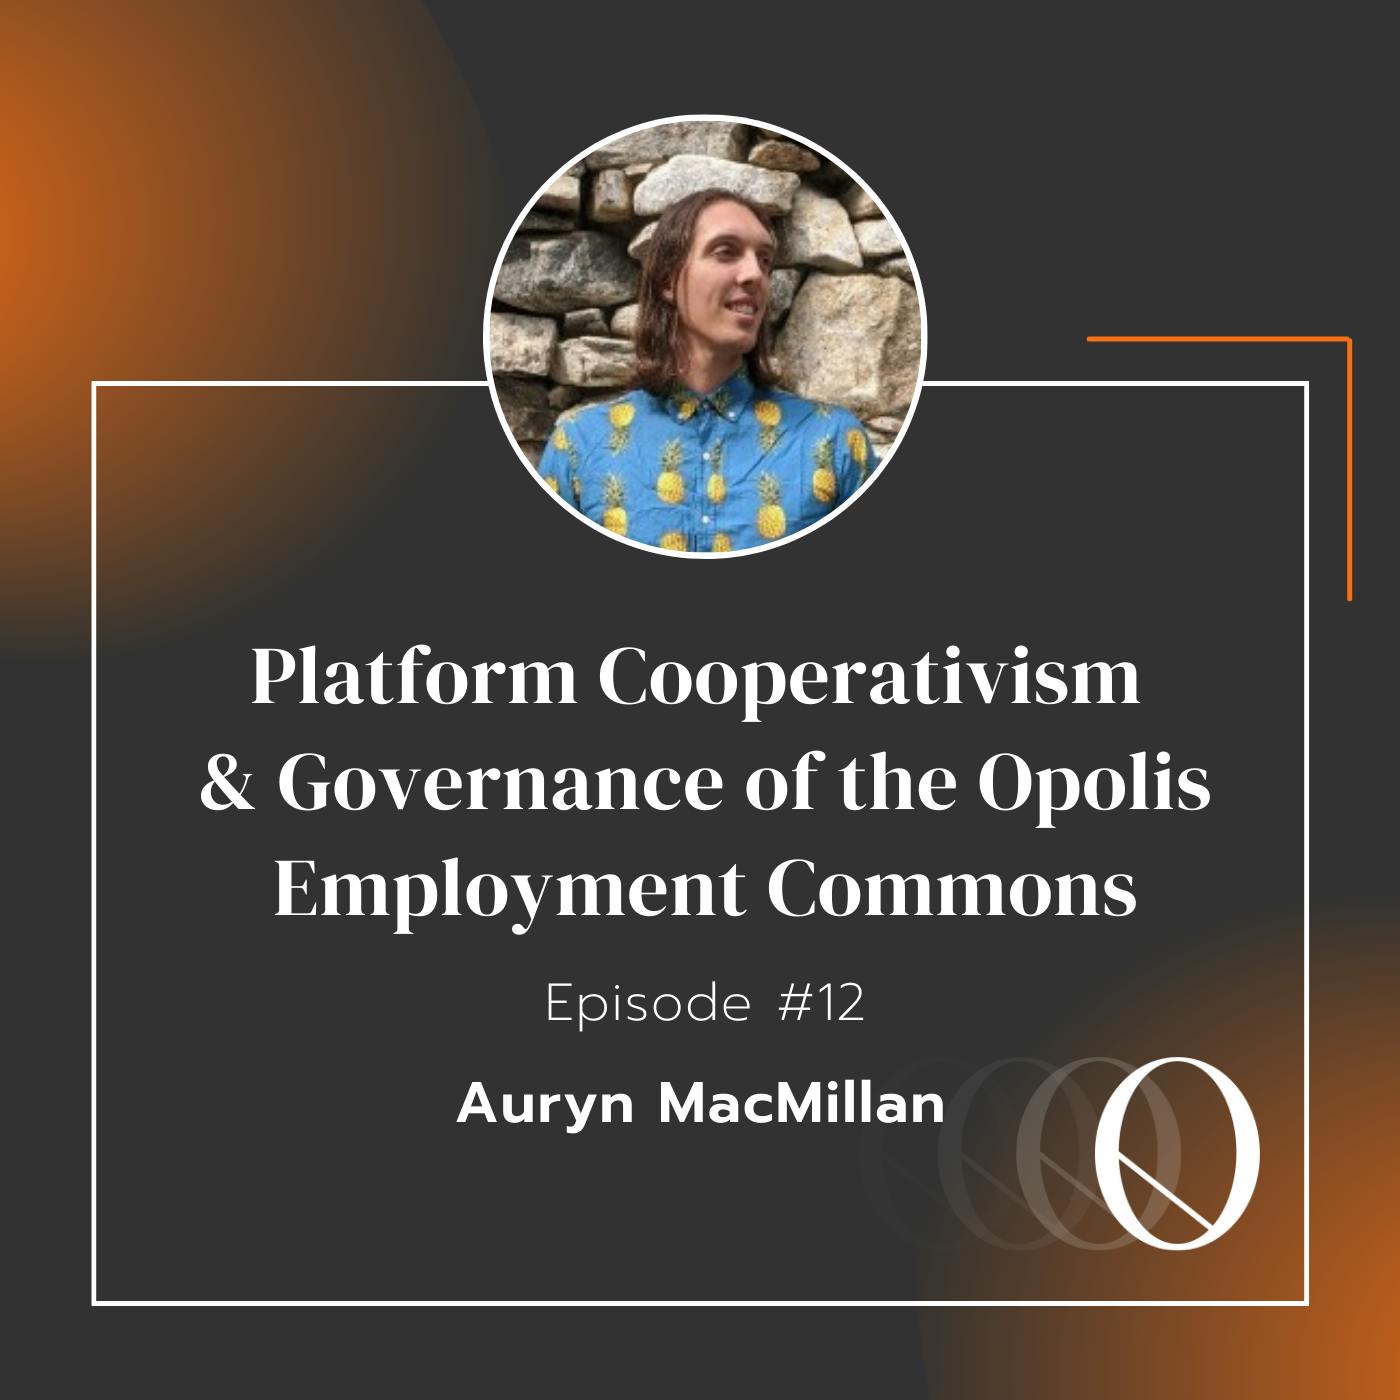 Episode 12: Platform Cooperativism & Governance of the Opolis Employment Commons with Auryn MacMillan